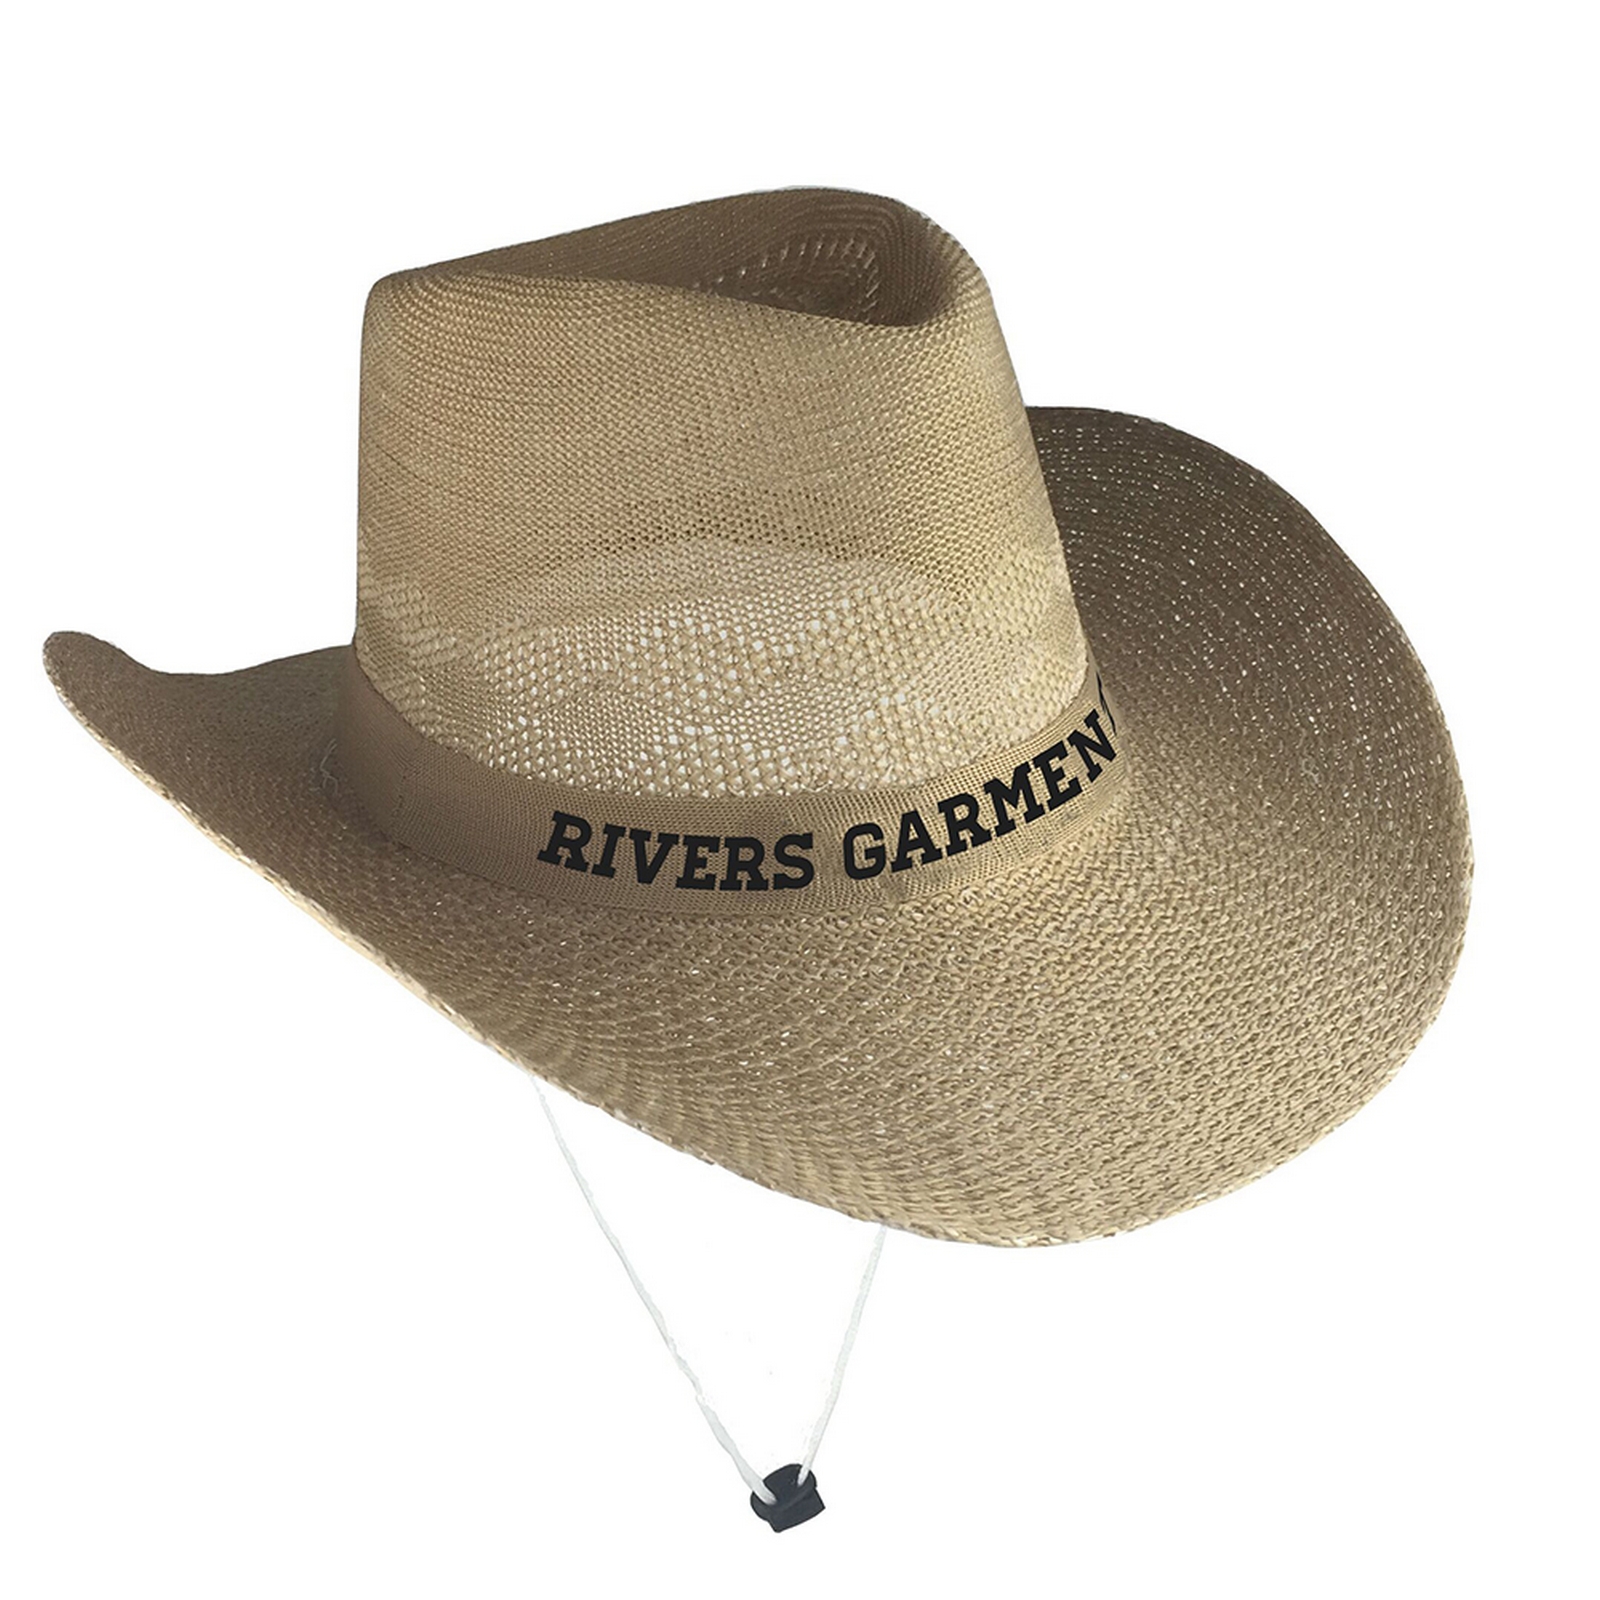 New Shape Cowboy Adult Hats- Imprintable Bands Available